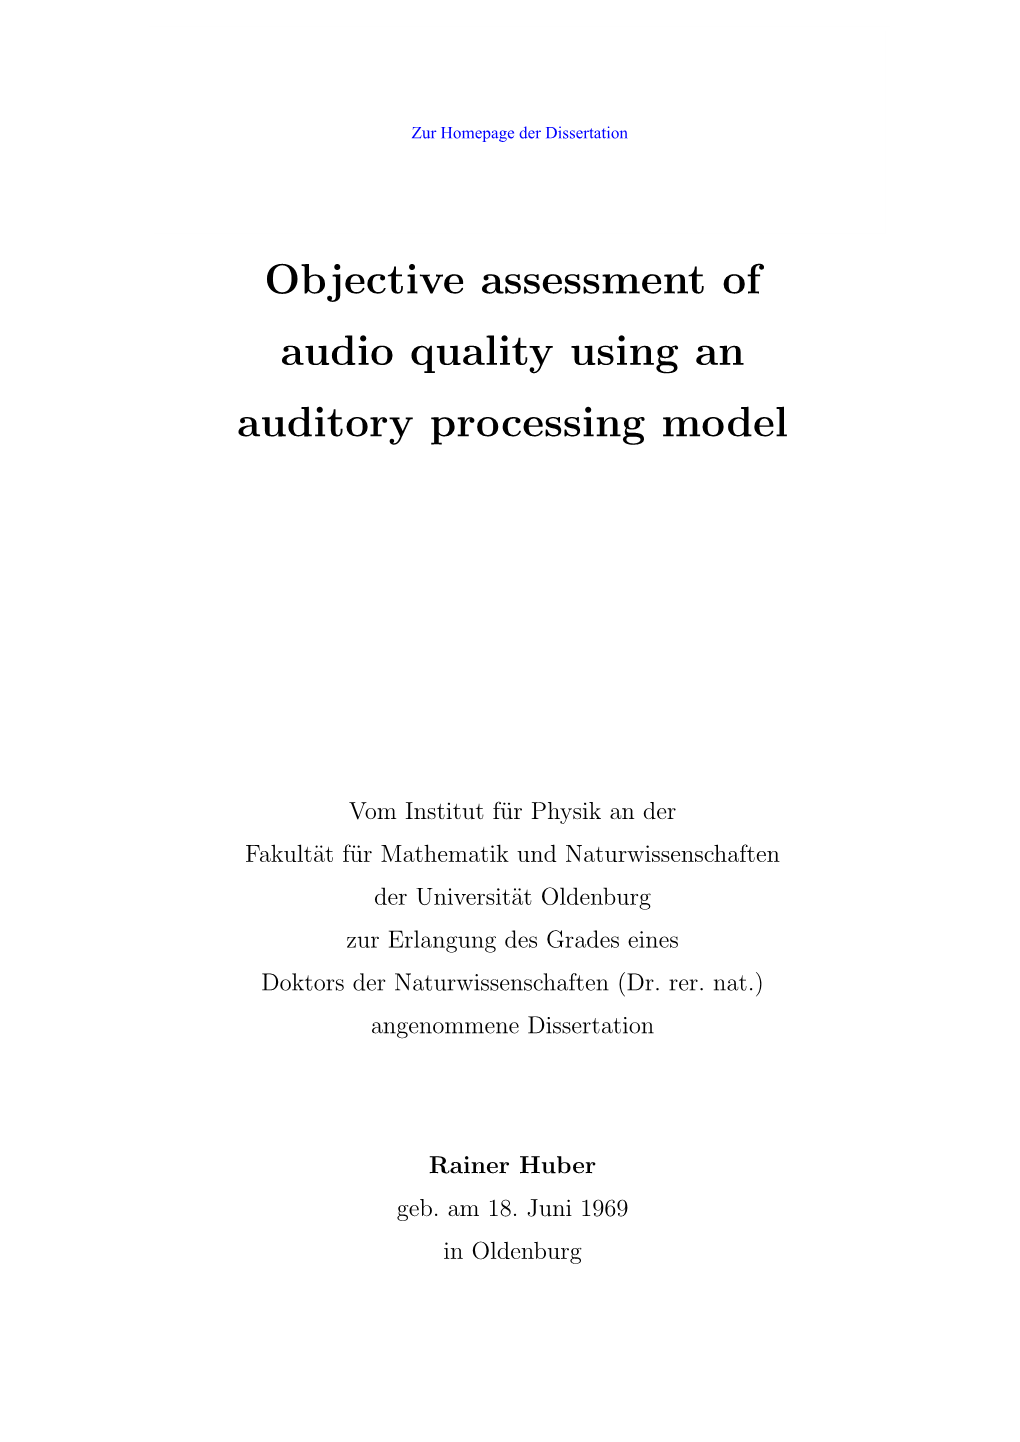 Objective Assessment of Audio Quality Using an Auditory Processing Model